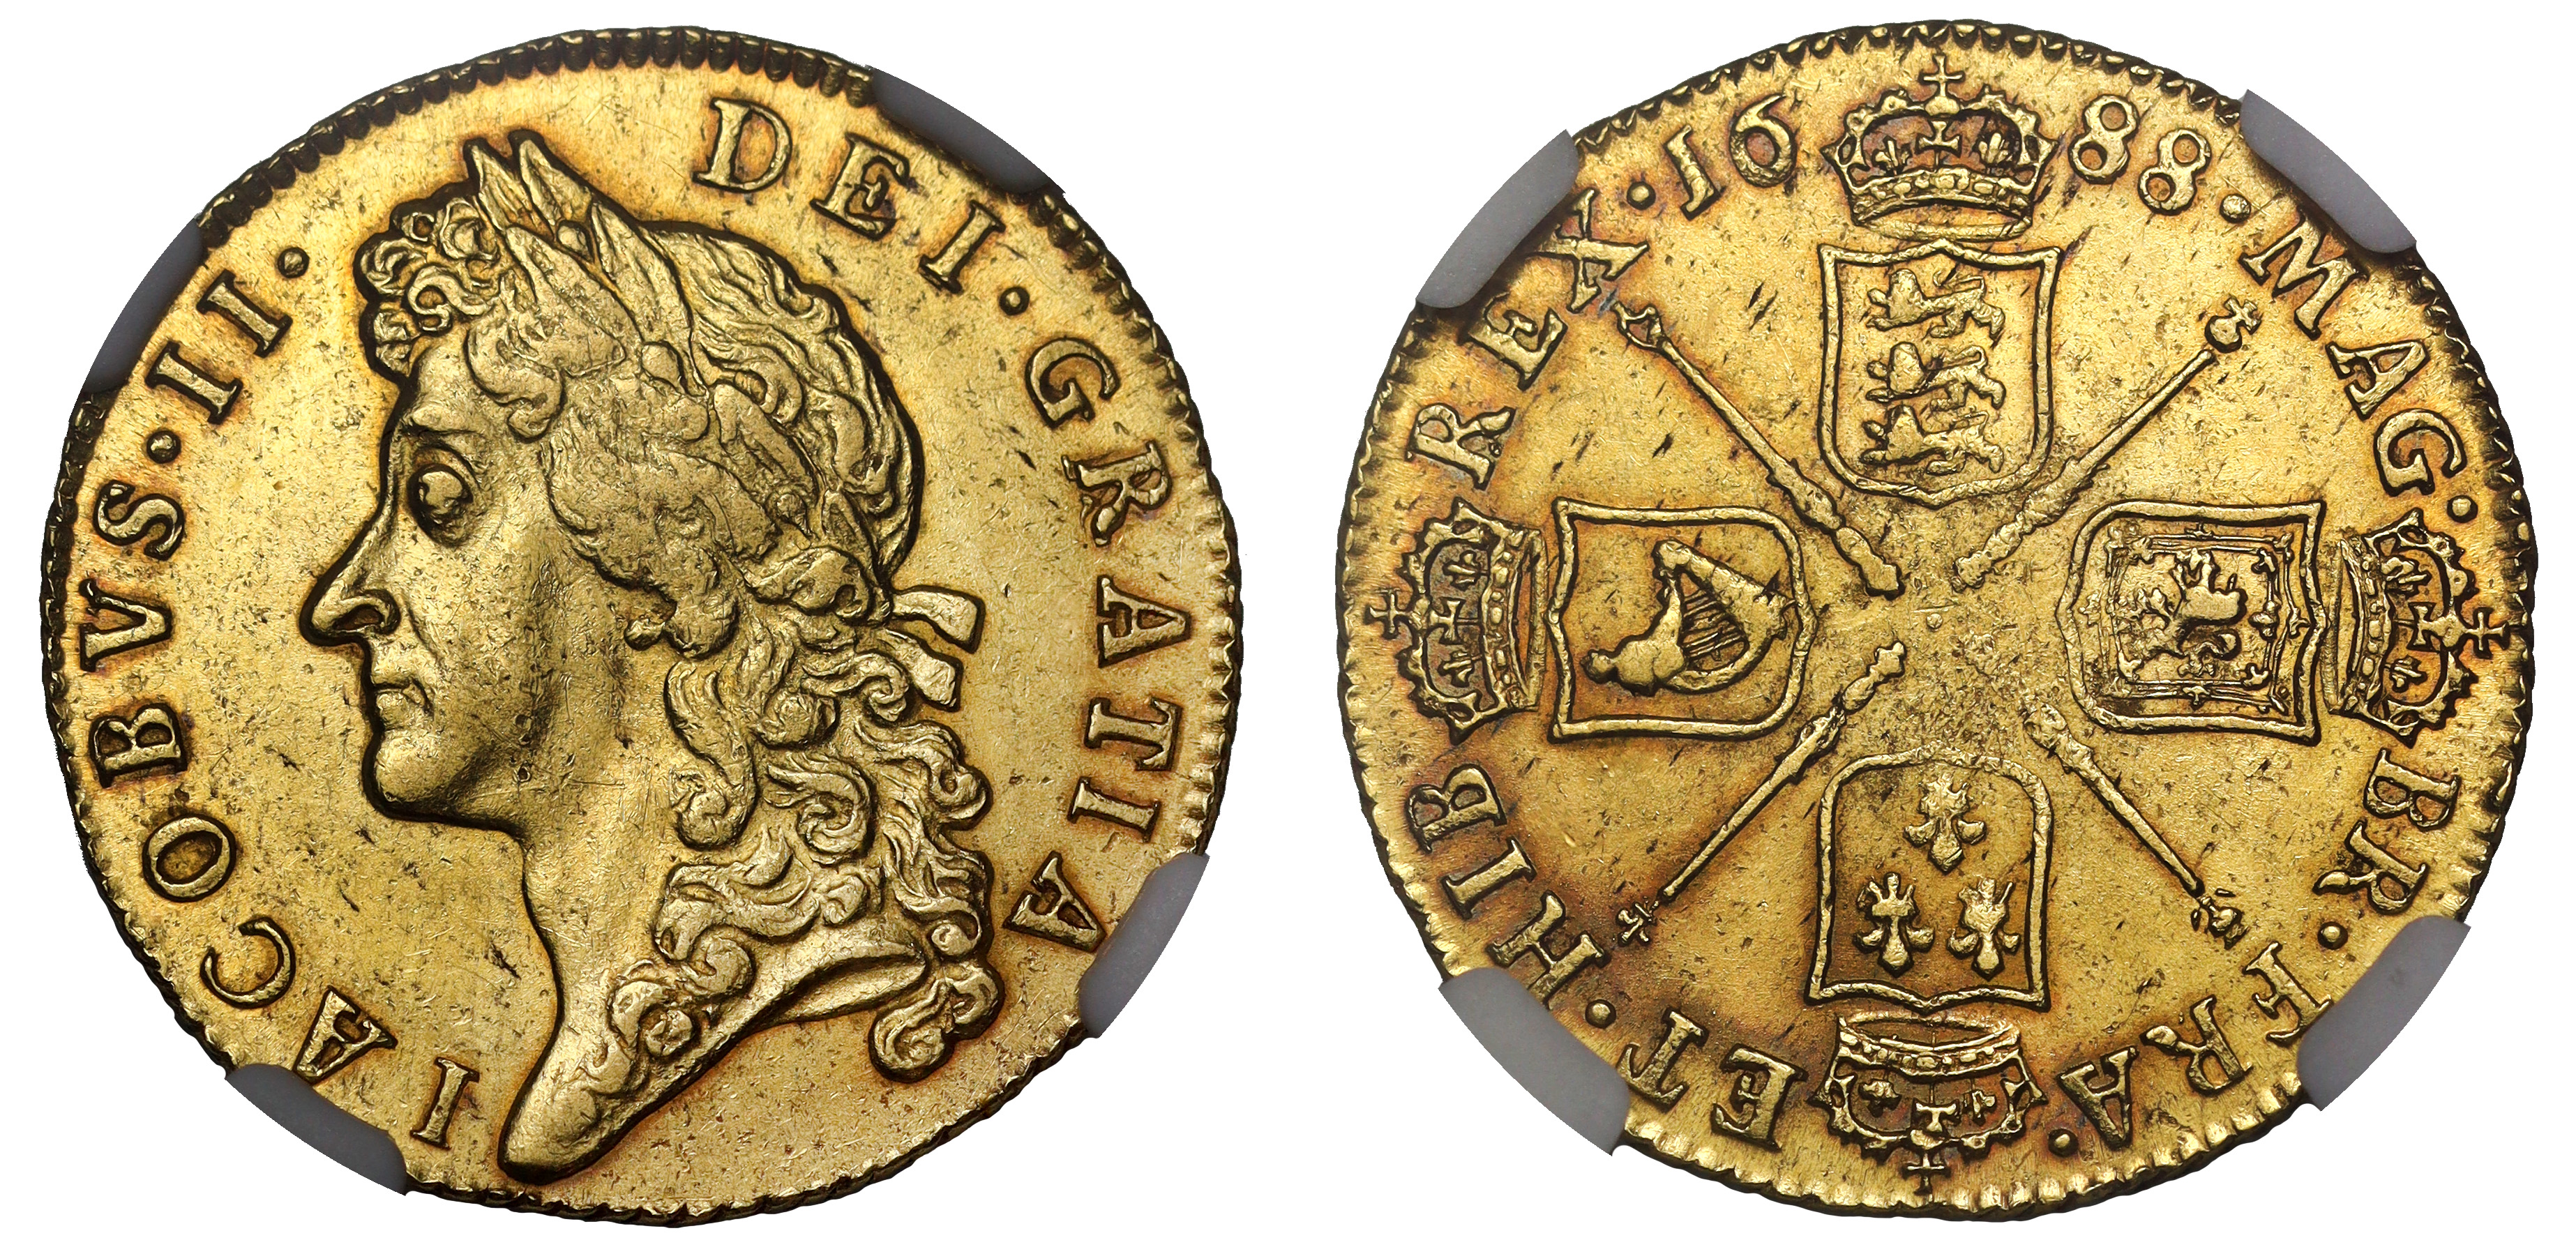 James II (1685-88), gold Guinea, 1688, second laureate head left, Latin legend and toothed border